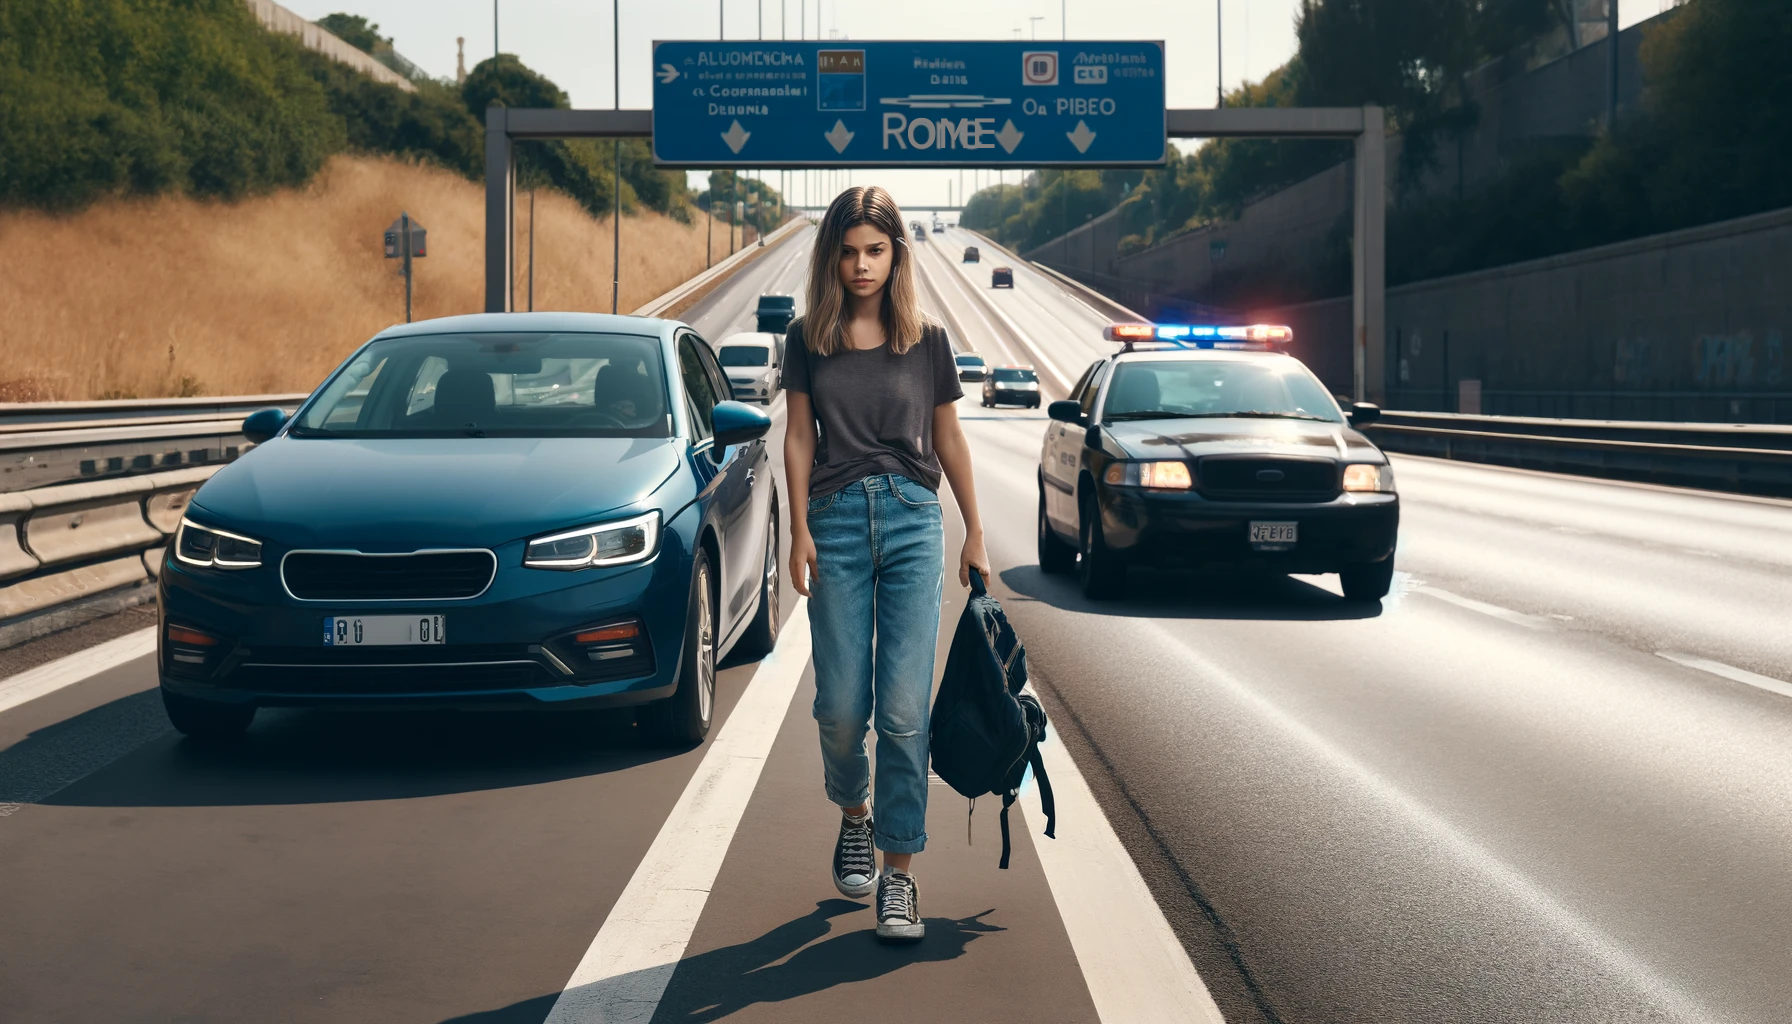 An Italian woman who dumped her 16-year-old daughter on a major Rome highway for a poor grade in Latin has been cited for alleged child abuse, media has reported.